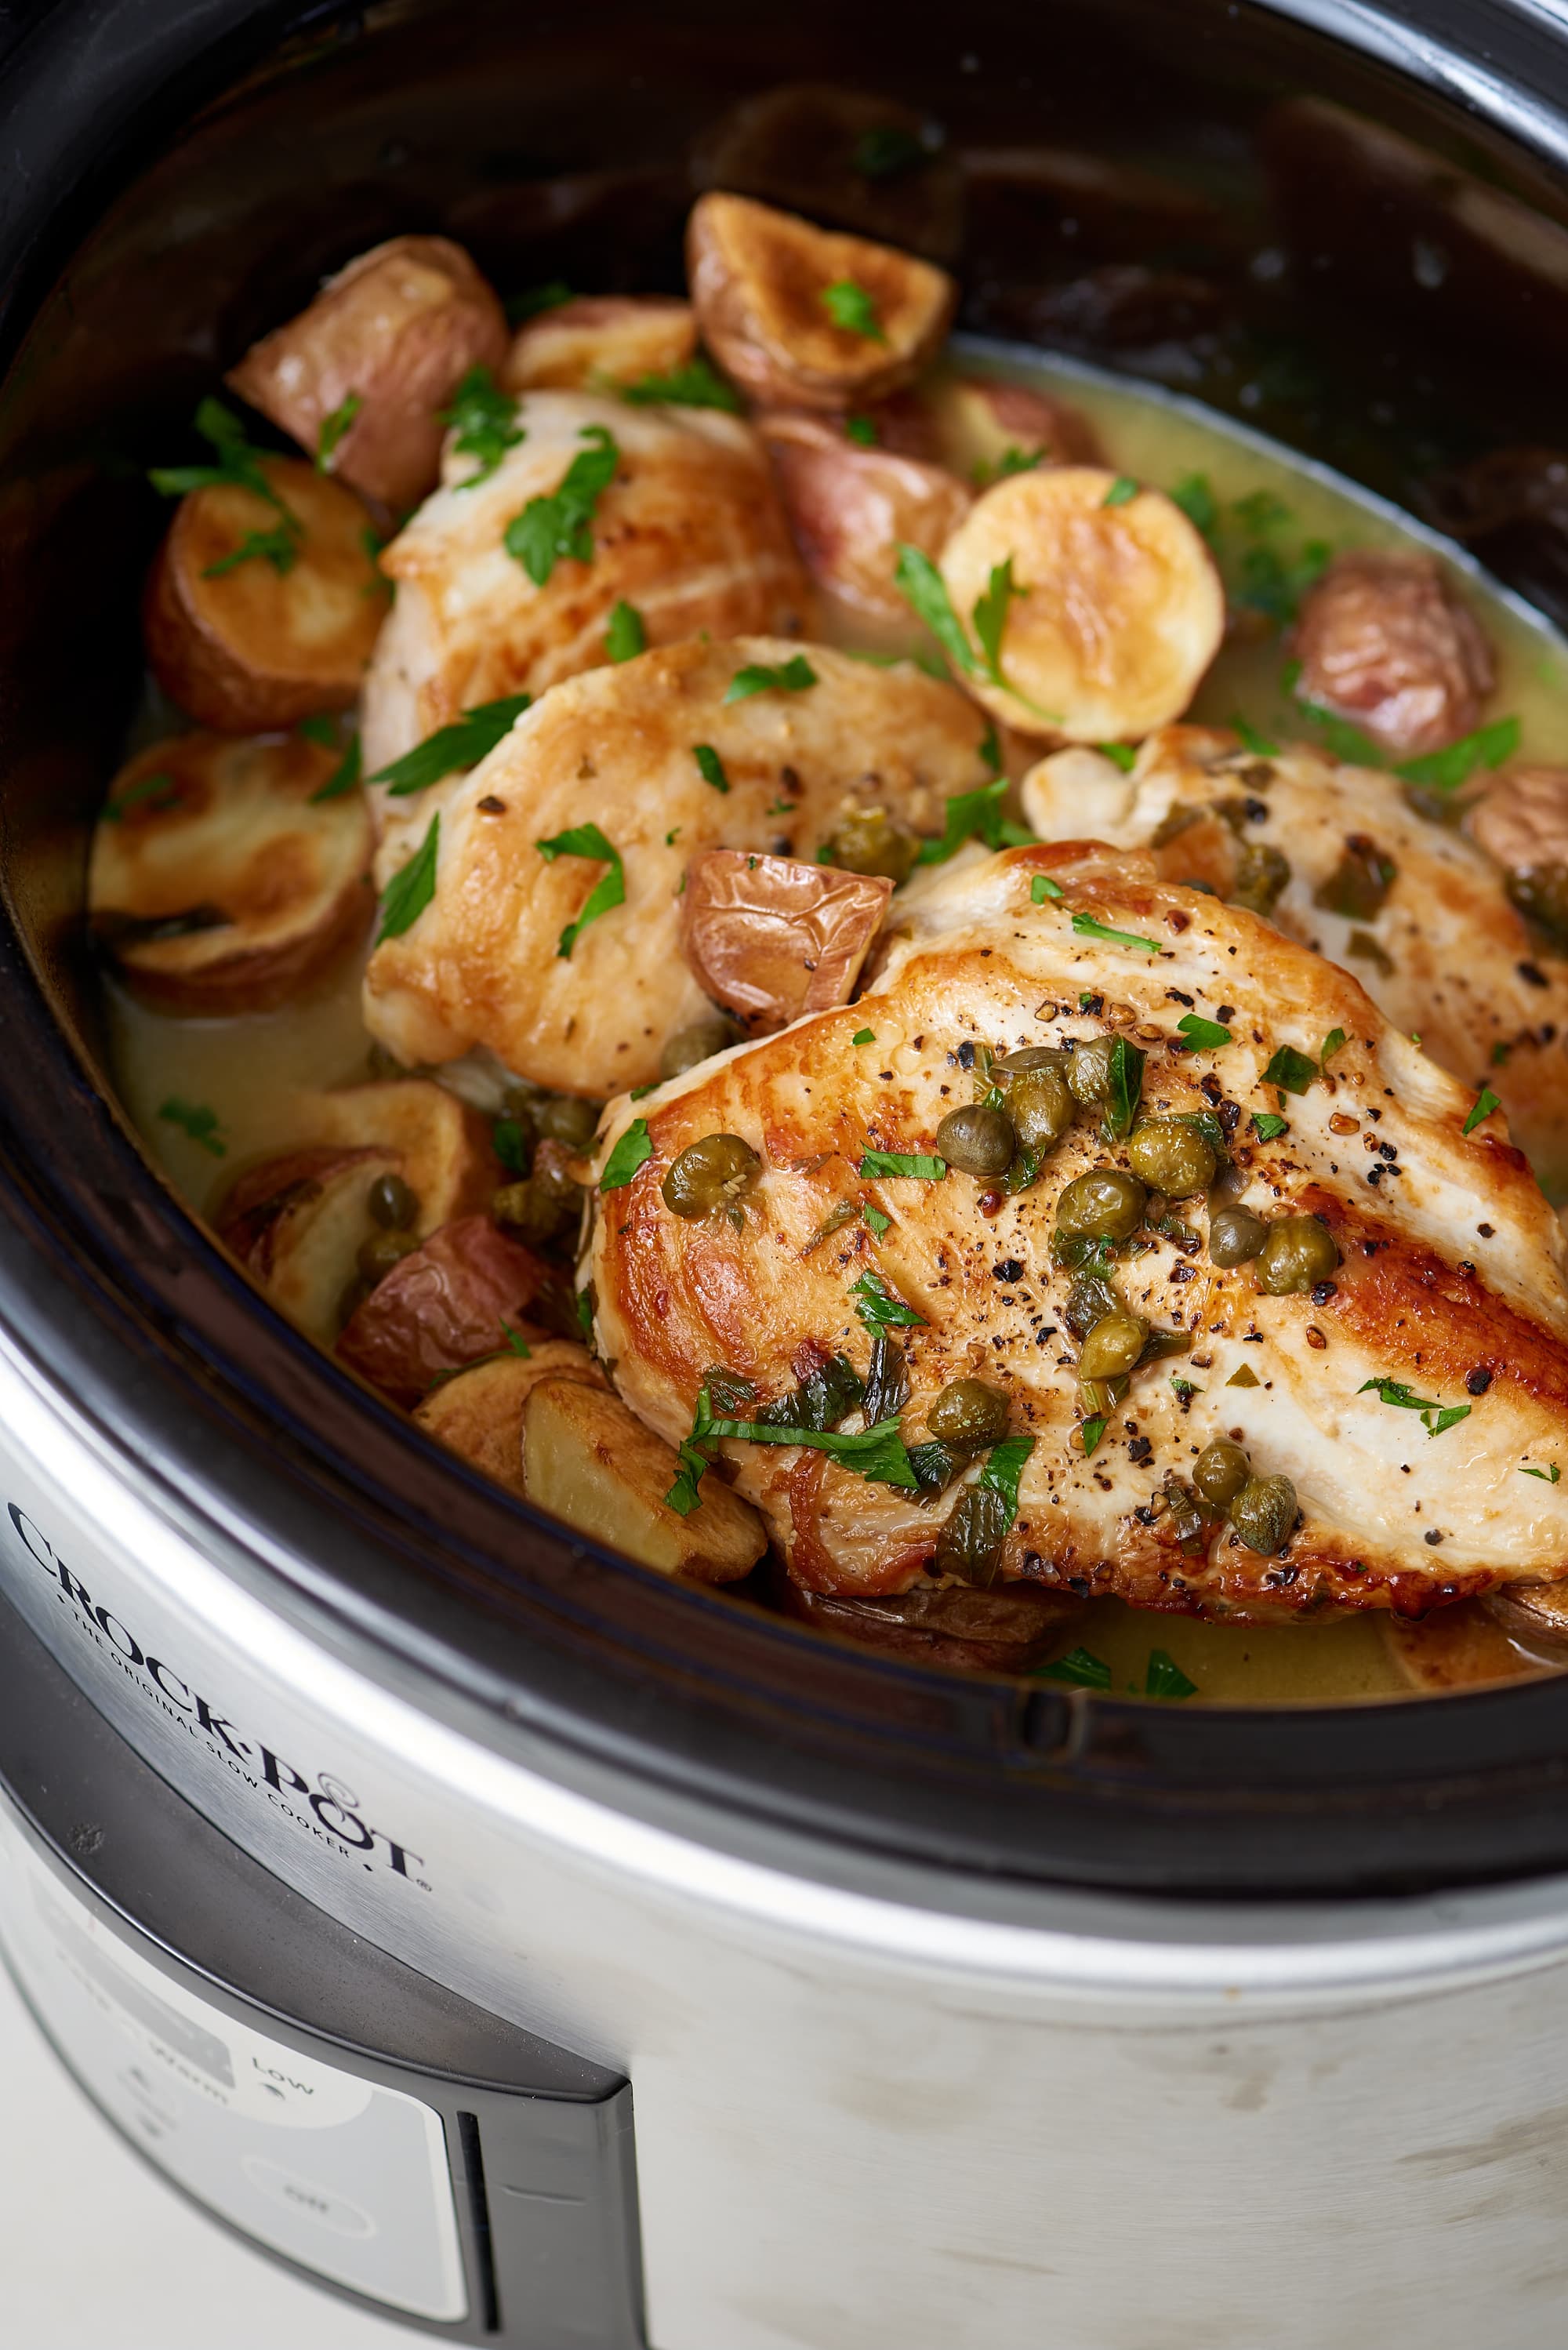 Best Slow Cookers 2021: Top-Rated Brands & What to Buy